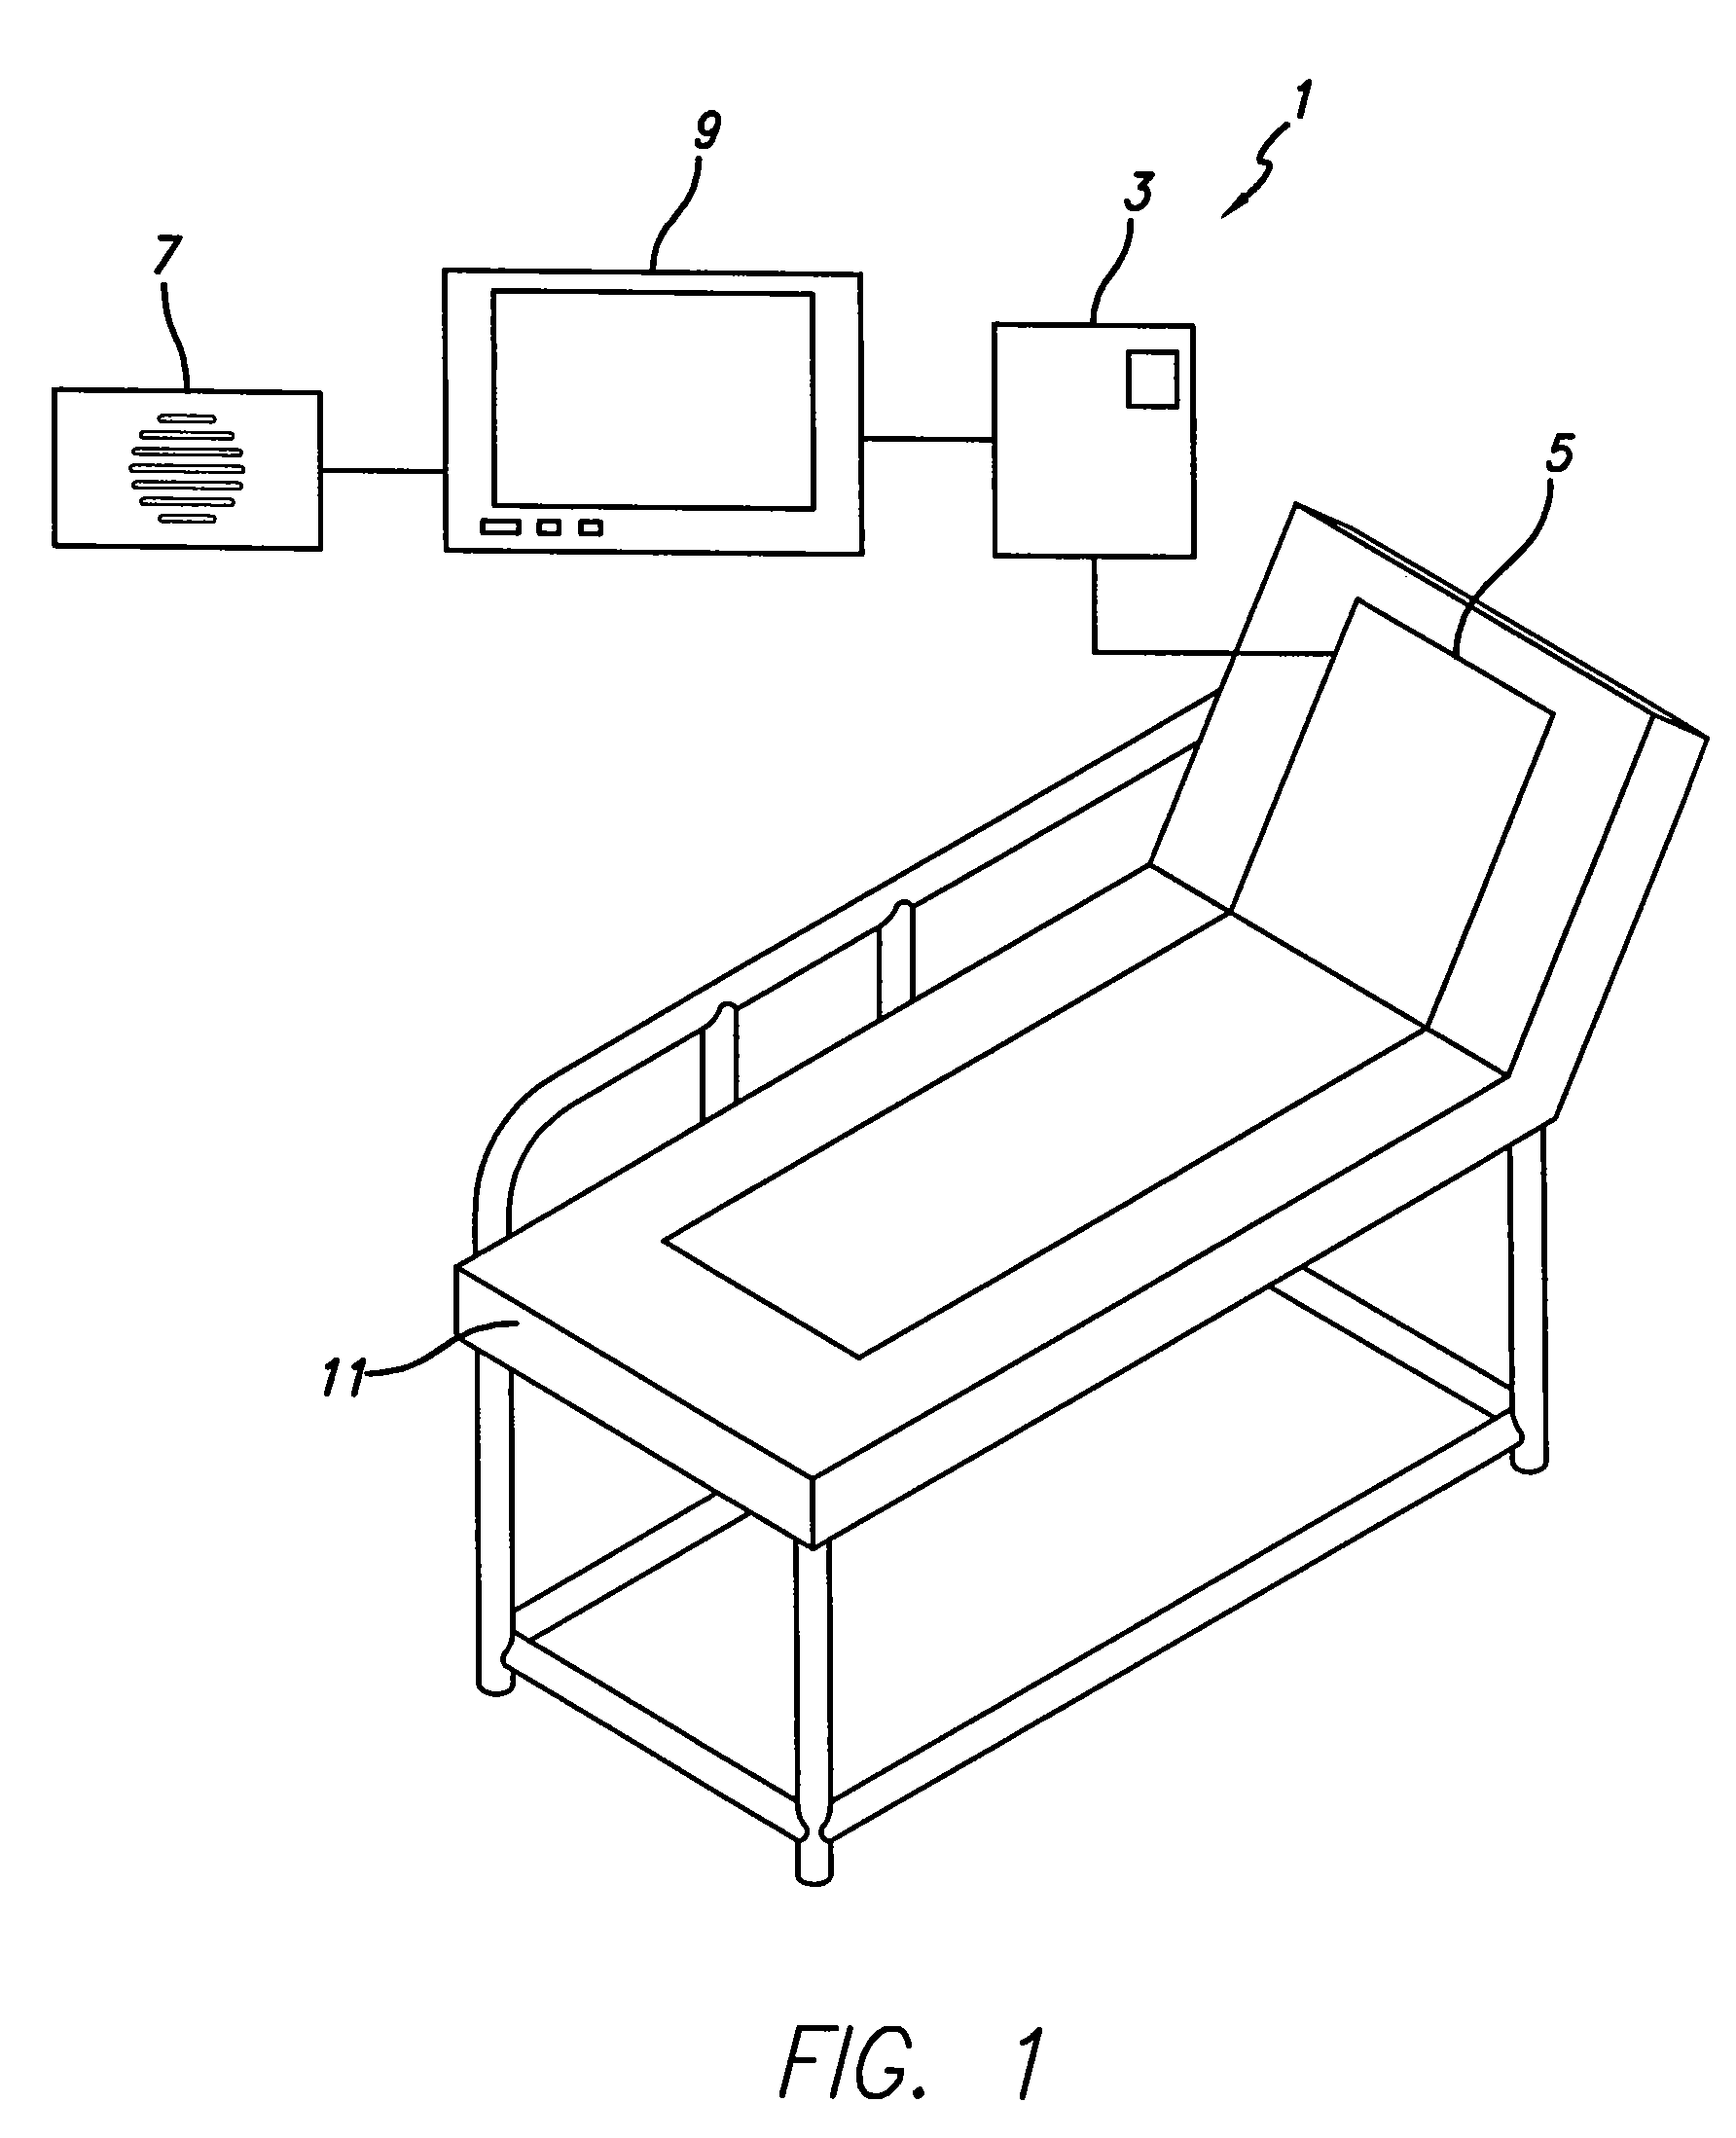 System and methods for intelligent medical vigilance with bed exit detection